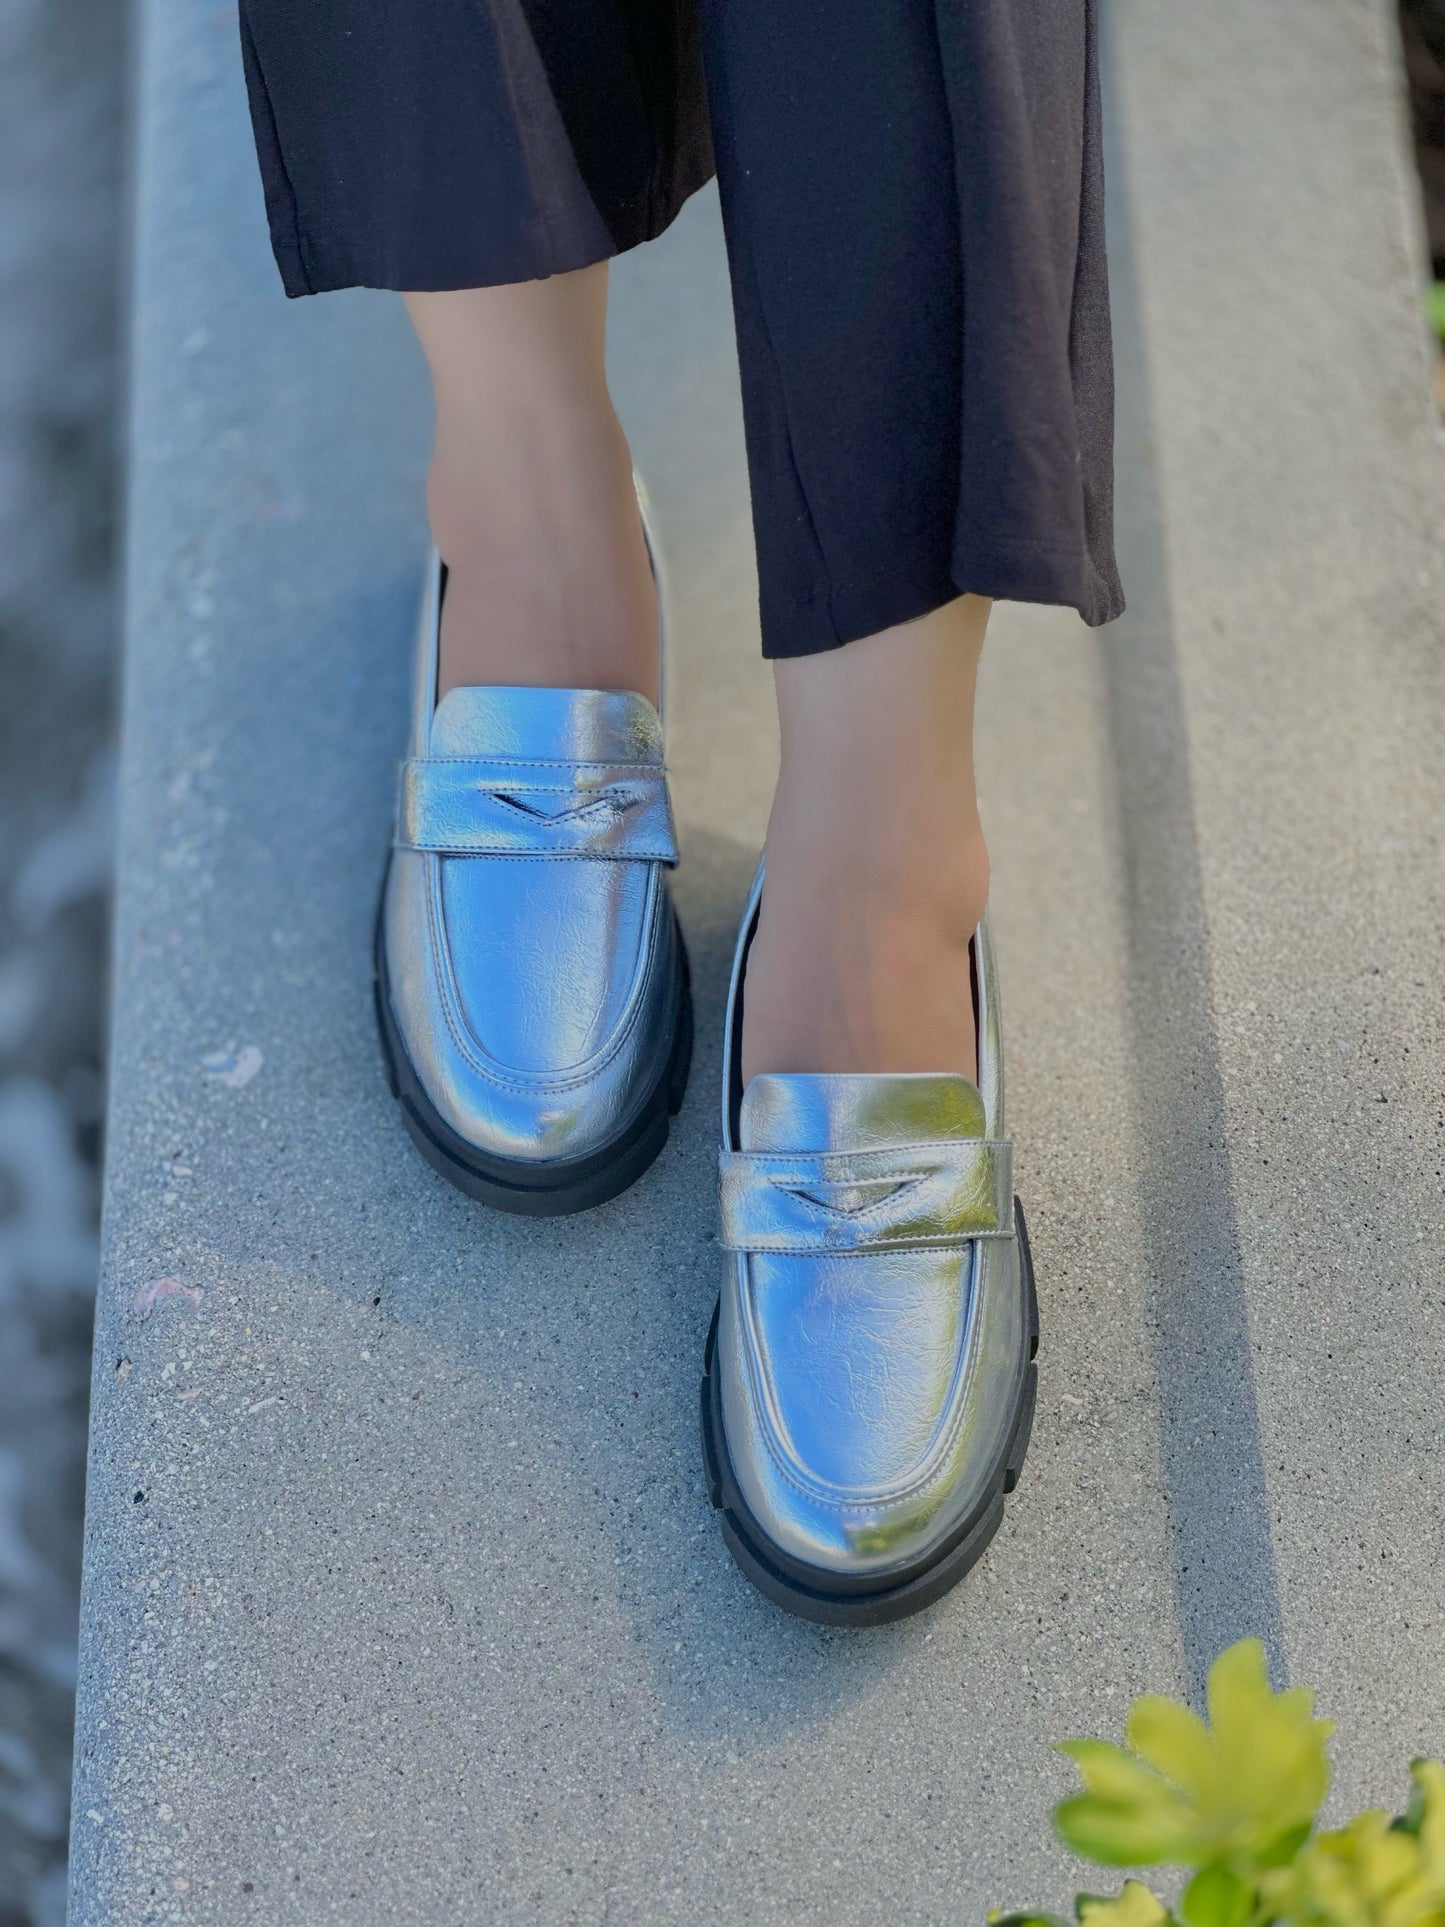 Metallic Silver Loafer 1747-29